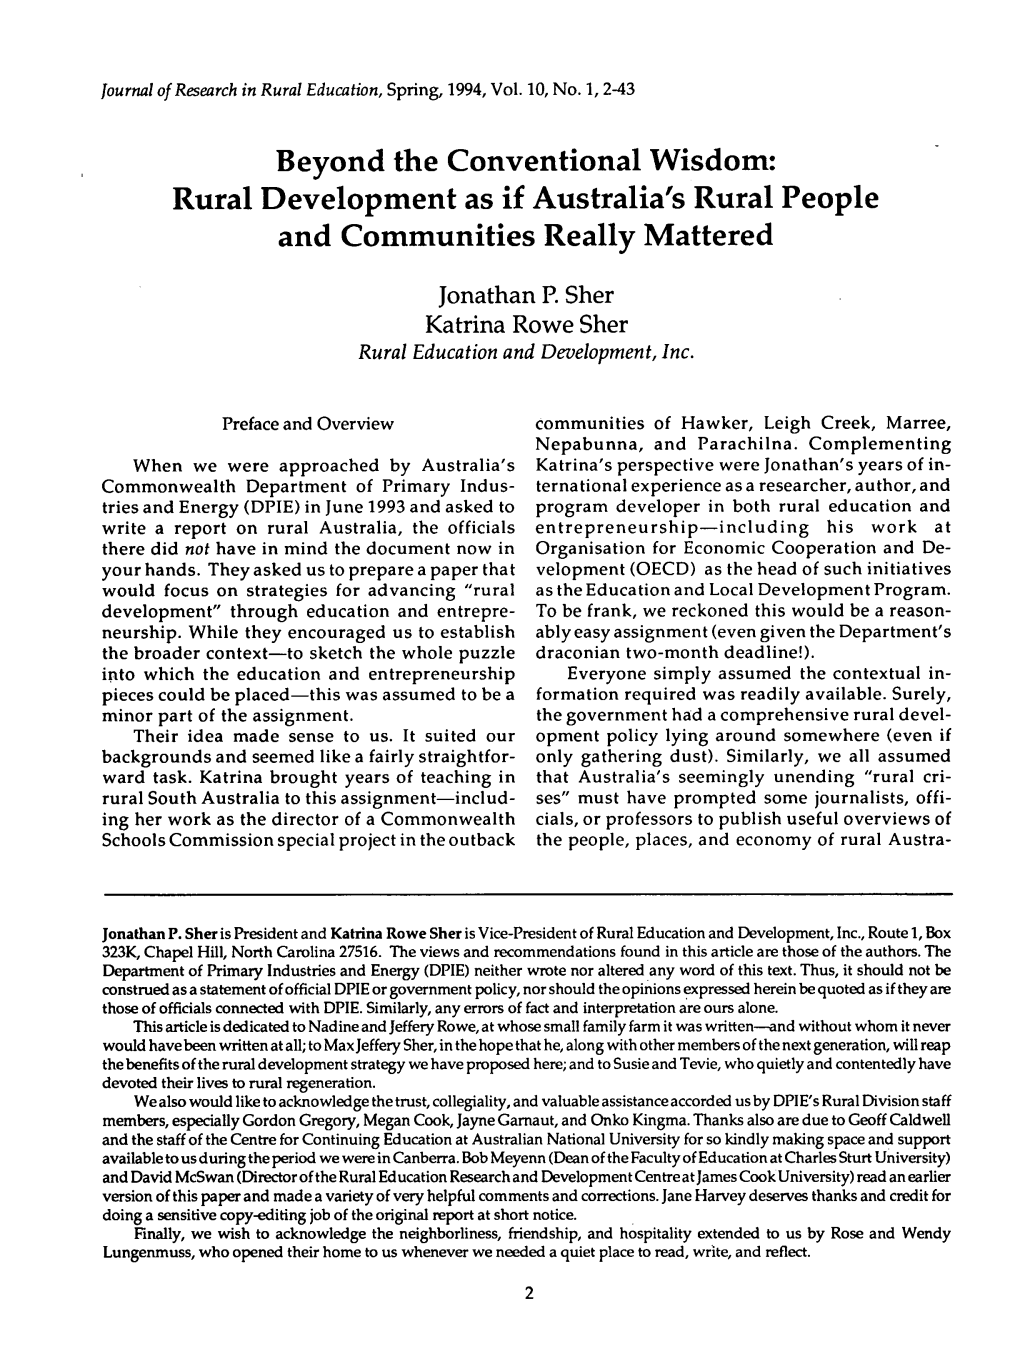 Rural Development As If Australia's Rural People and Communities Really Mattered